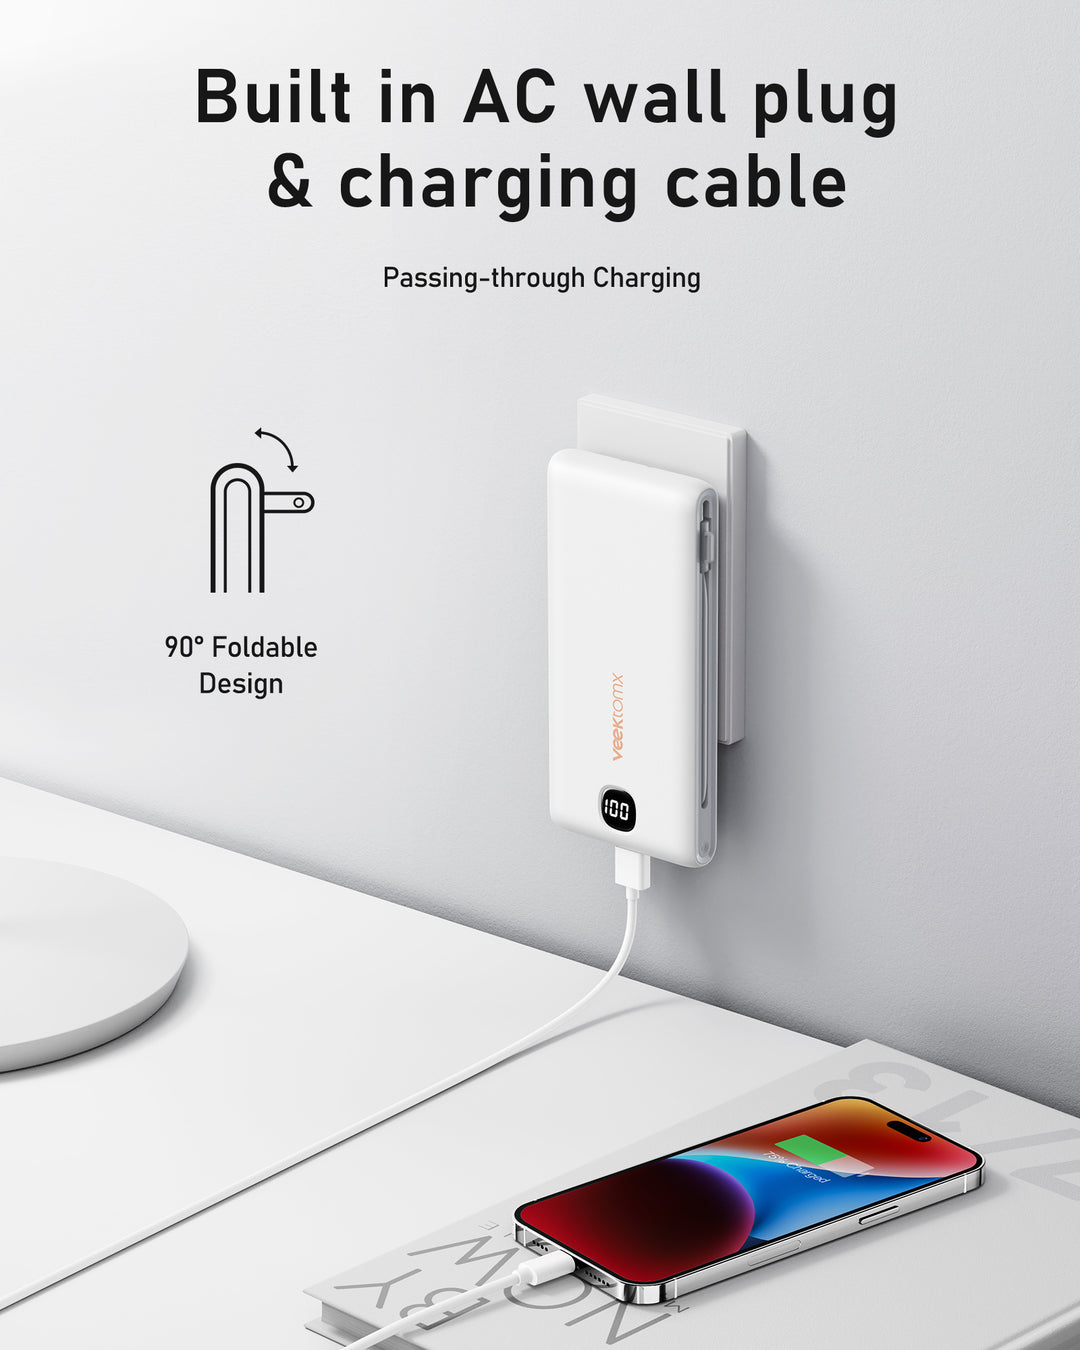 Power Bank With Built In Cables 10000mAh, Portable Charger For  With Built In AC Wall Plug, Fast Charging USB C Slim  Charger With LED Display Com